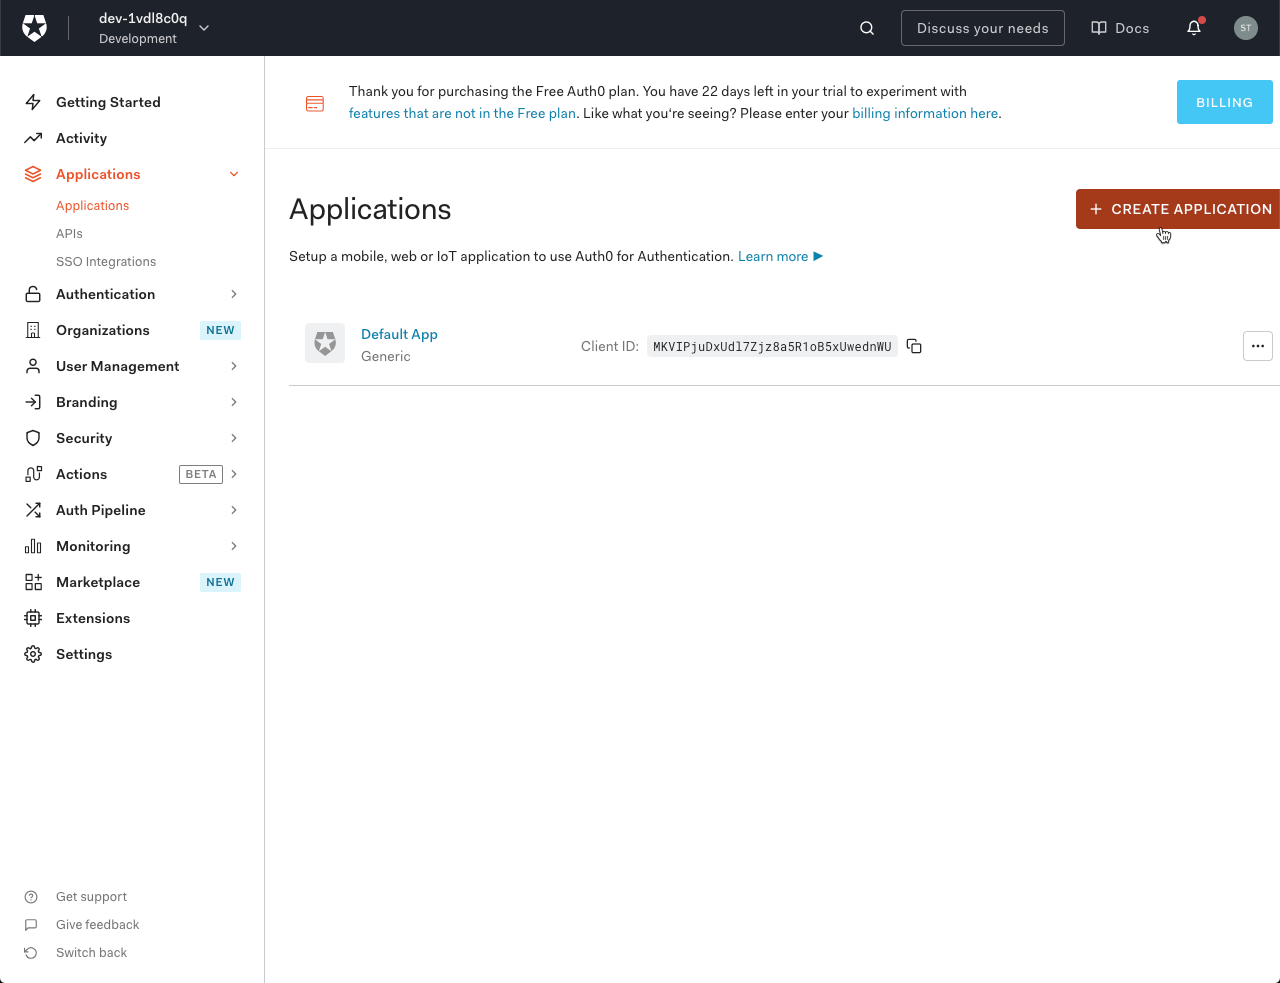 Auth0 Create Application